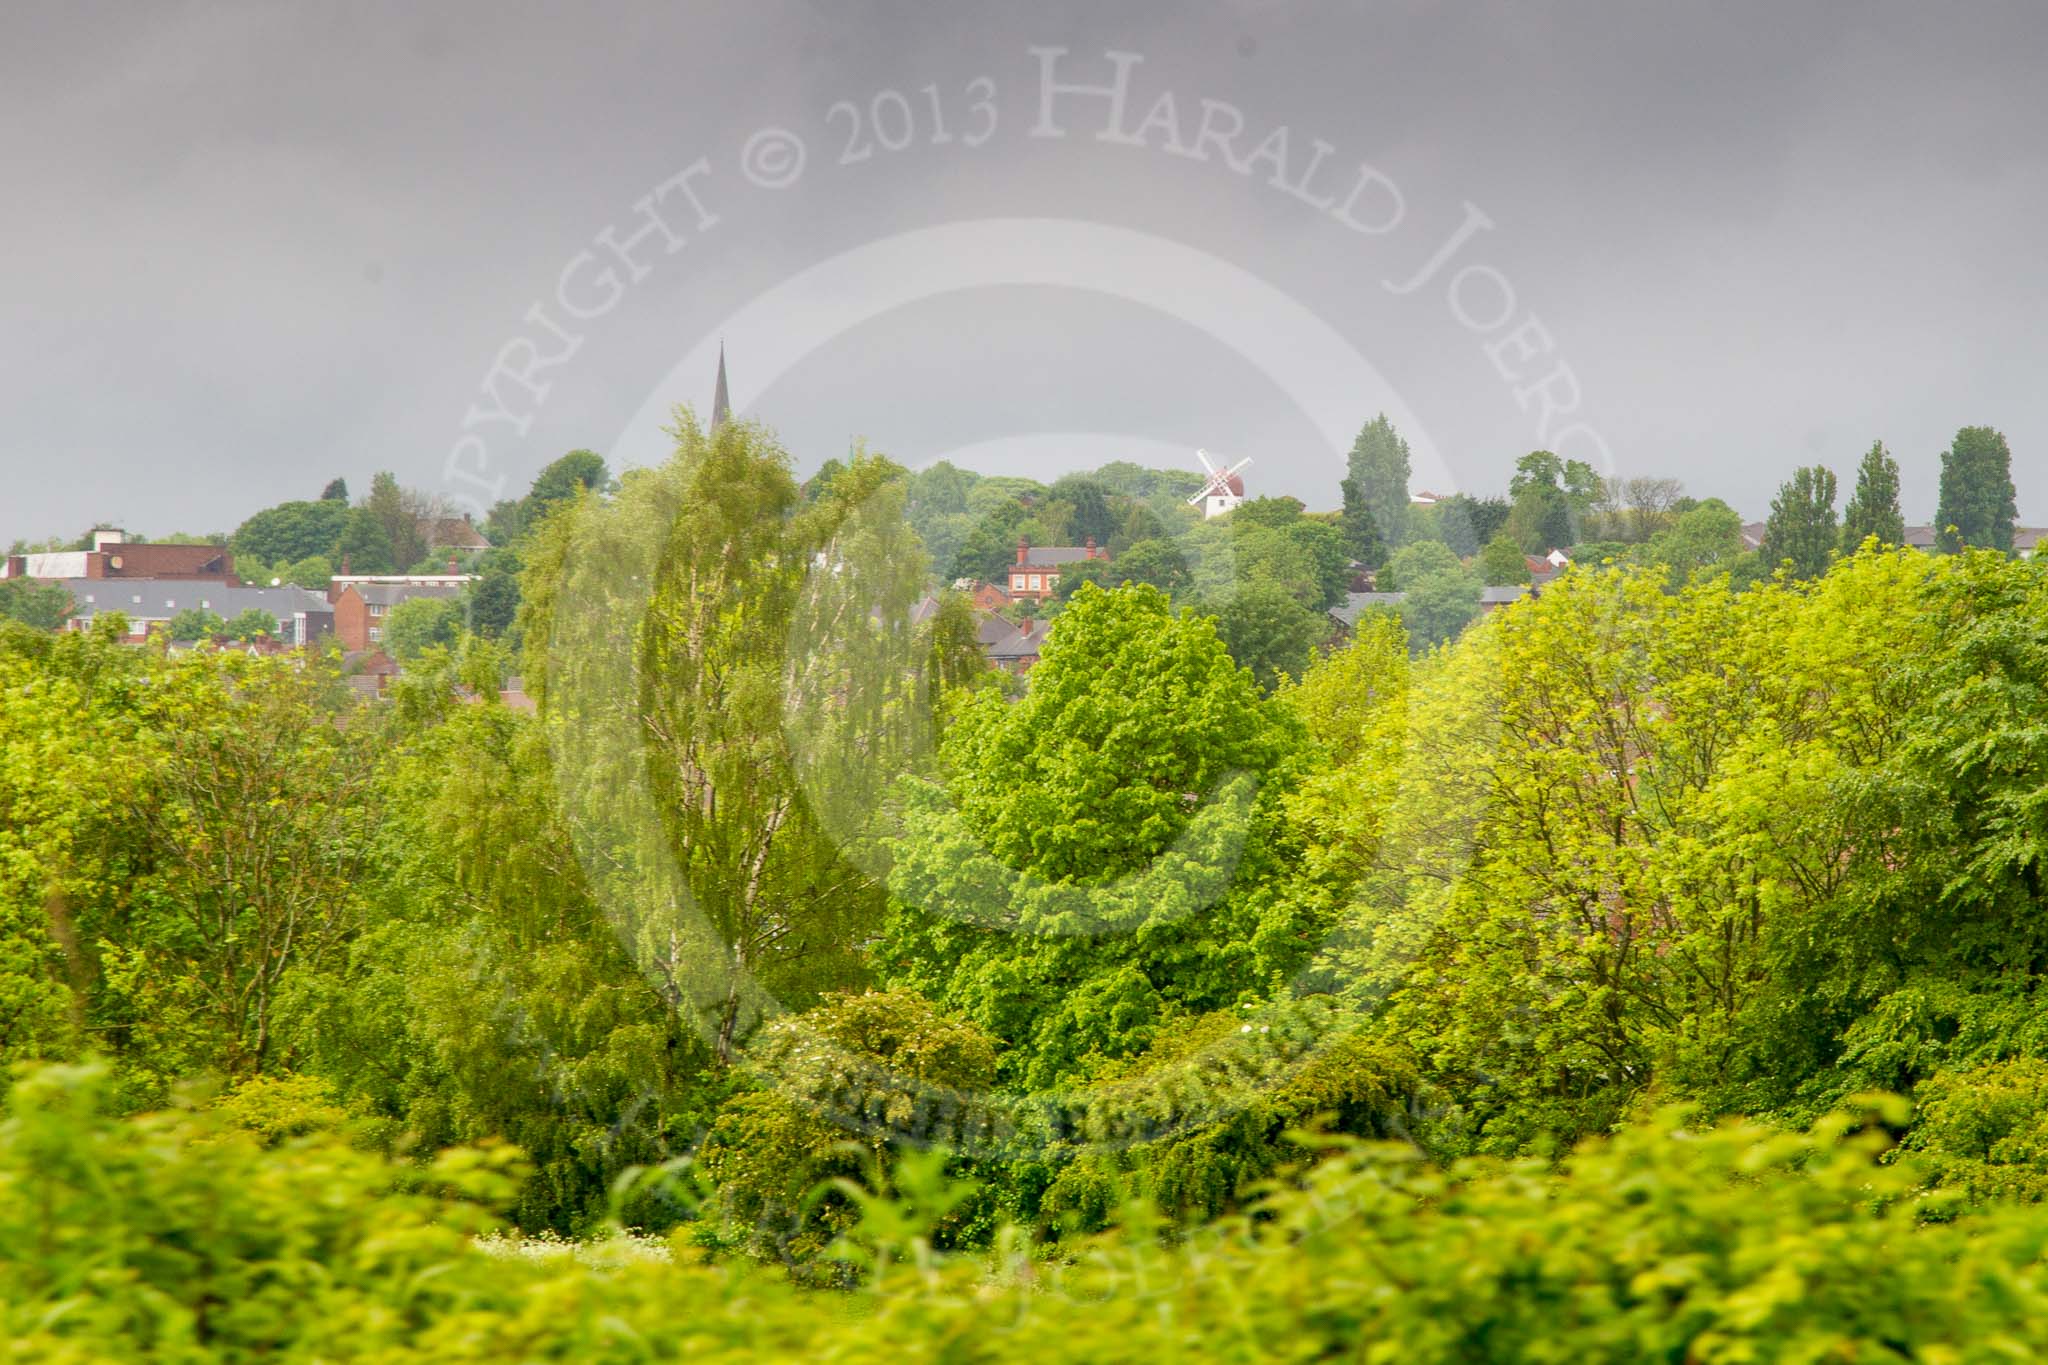 BCN Marathon Challenge 2014: Wednesbury, seen from the Tame Valley Canal: The spire of St Bartholomews Church and Wednesbury Windmill..
Birmingham Canal Navigation,


United Kingdom,
on 24 May 2014 at 15:36, image #154